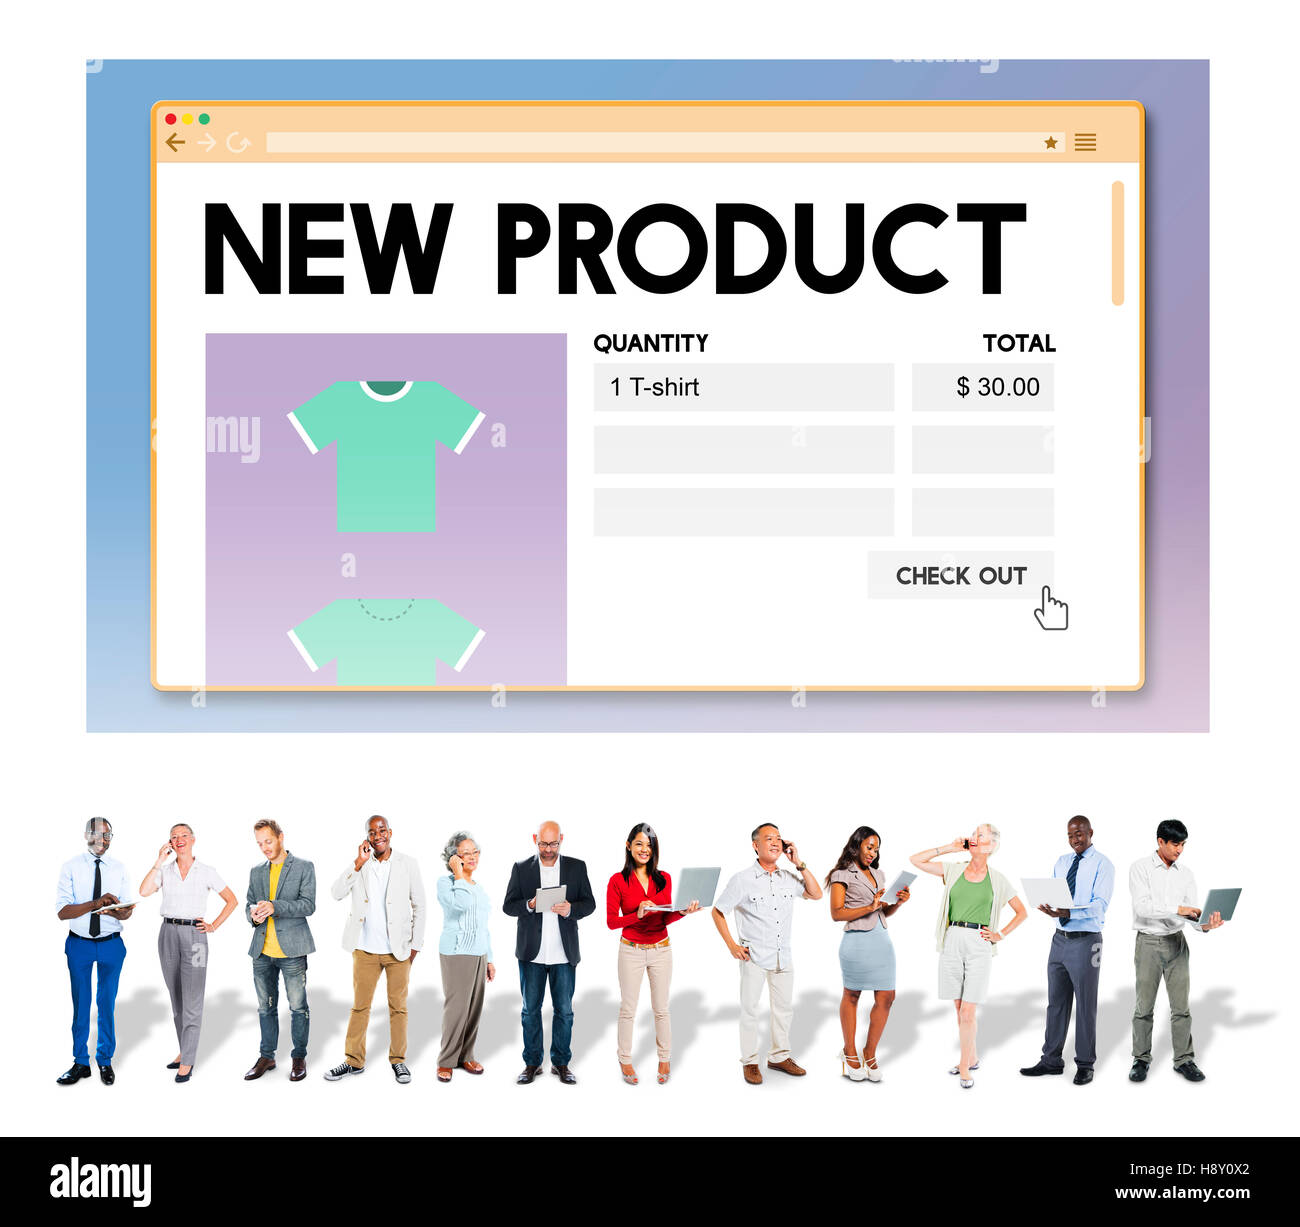 New Product Launch Promotion Marketing Services Concept Stock Photo